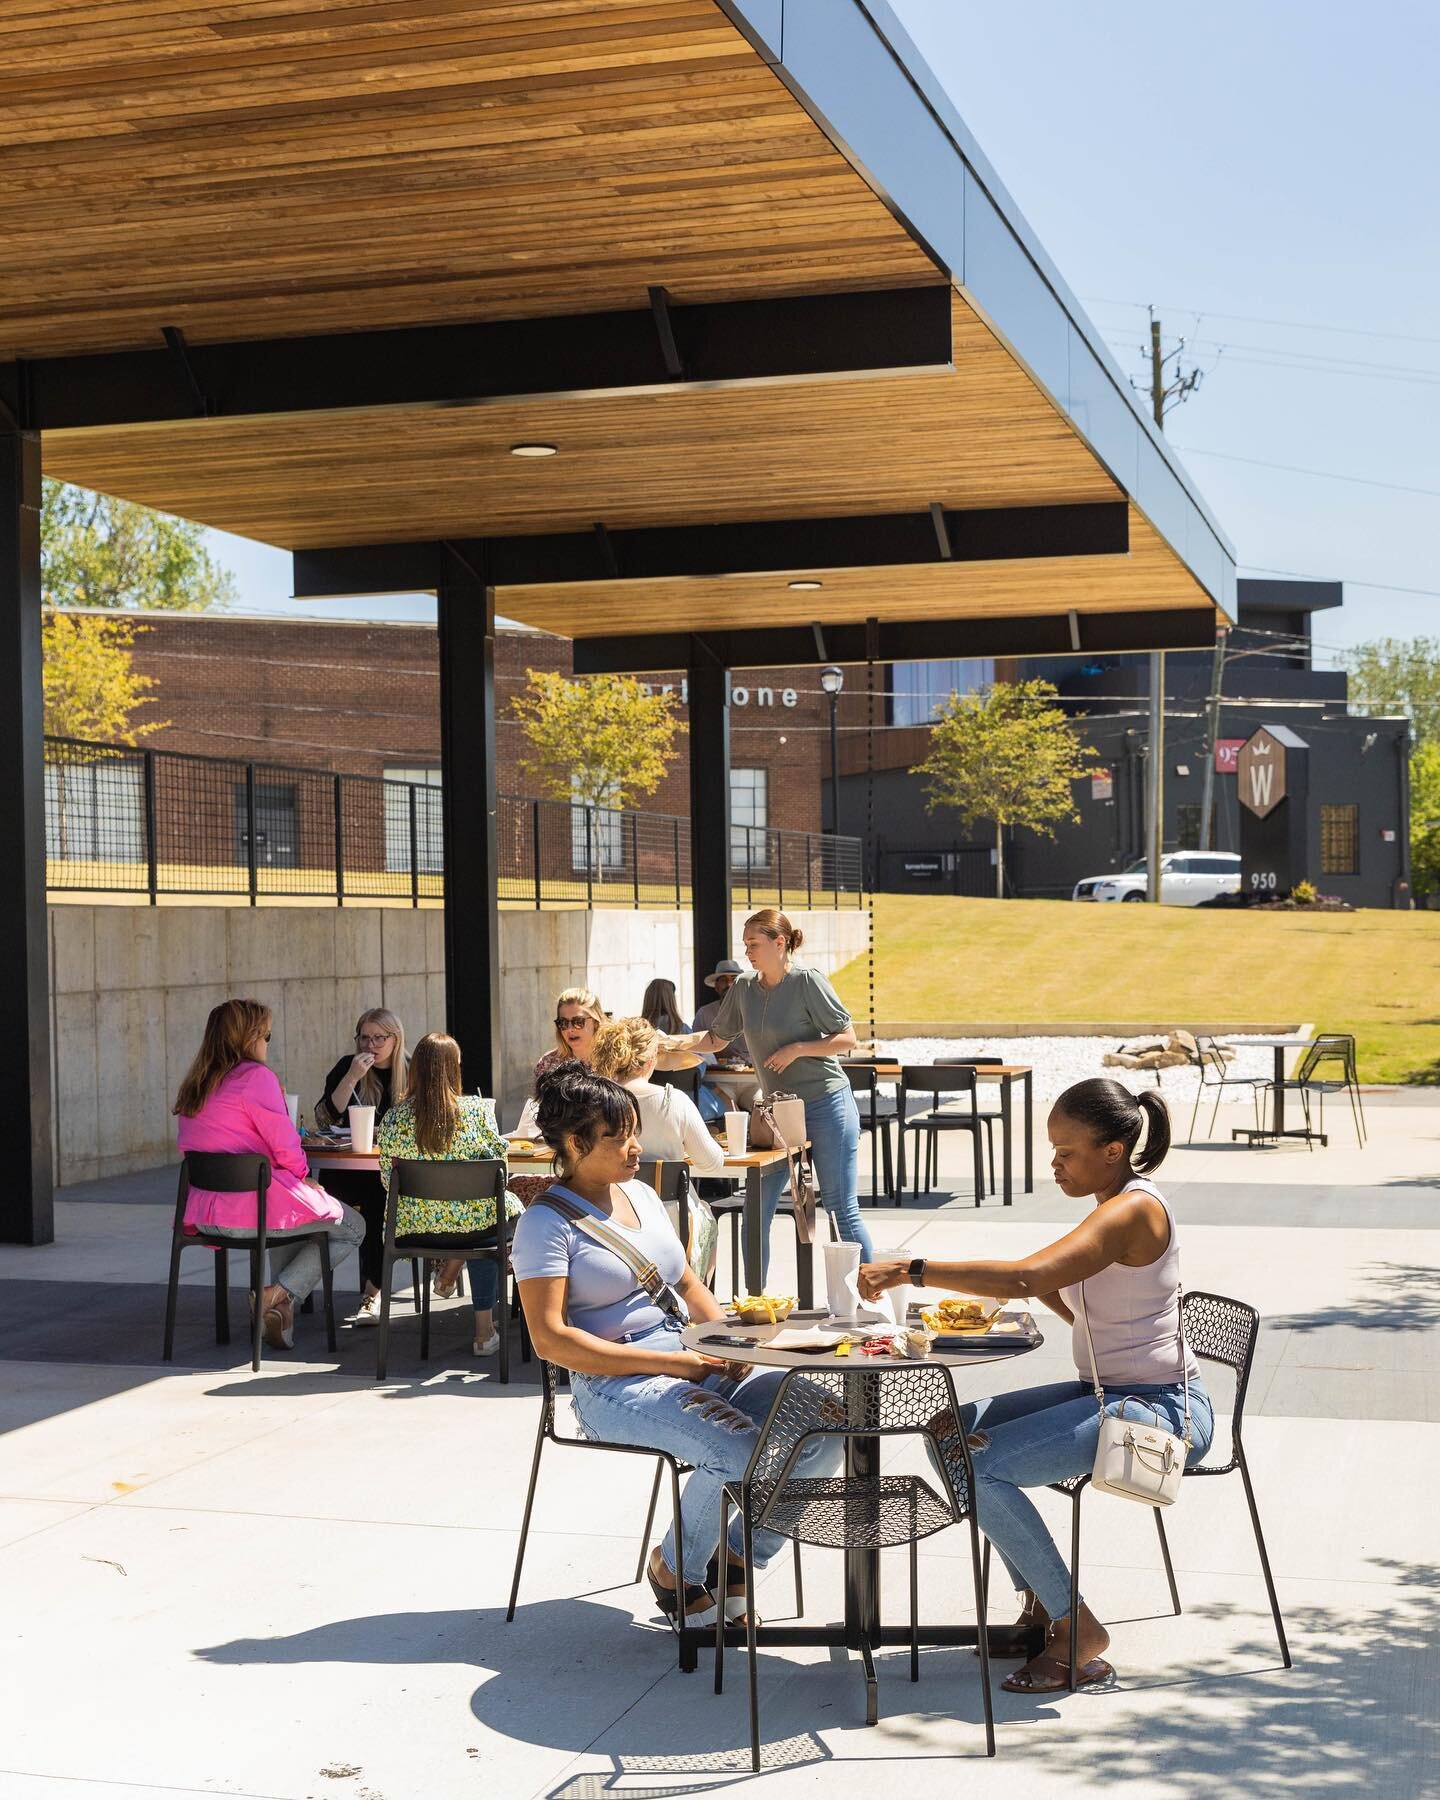 If you haven't had the chance to visit @boxcarbettys at Westside Paper, you're in for a treat! Stop by to try one of their award-winning chicken sandwiches and enjoy our beautiful, outdoor dining area! 🌳